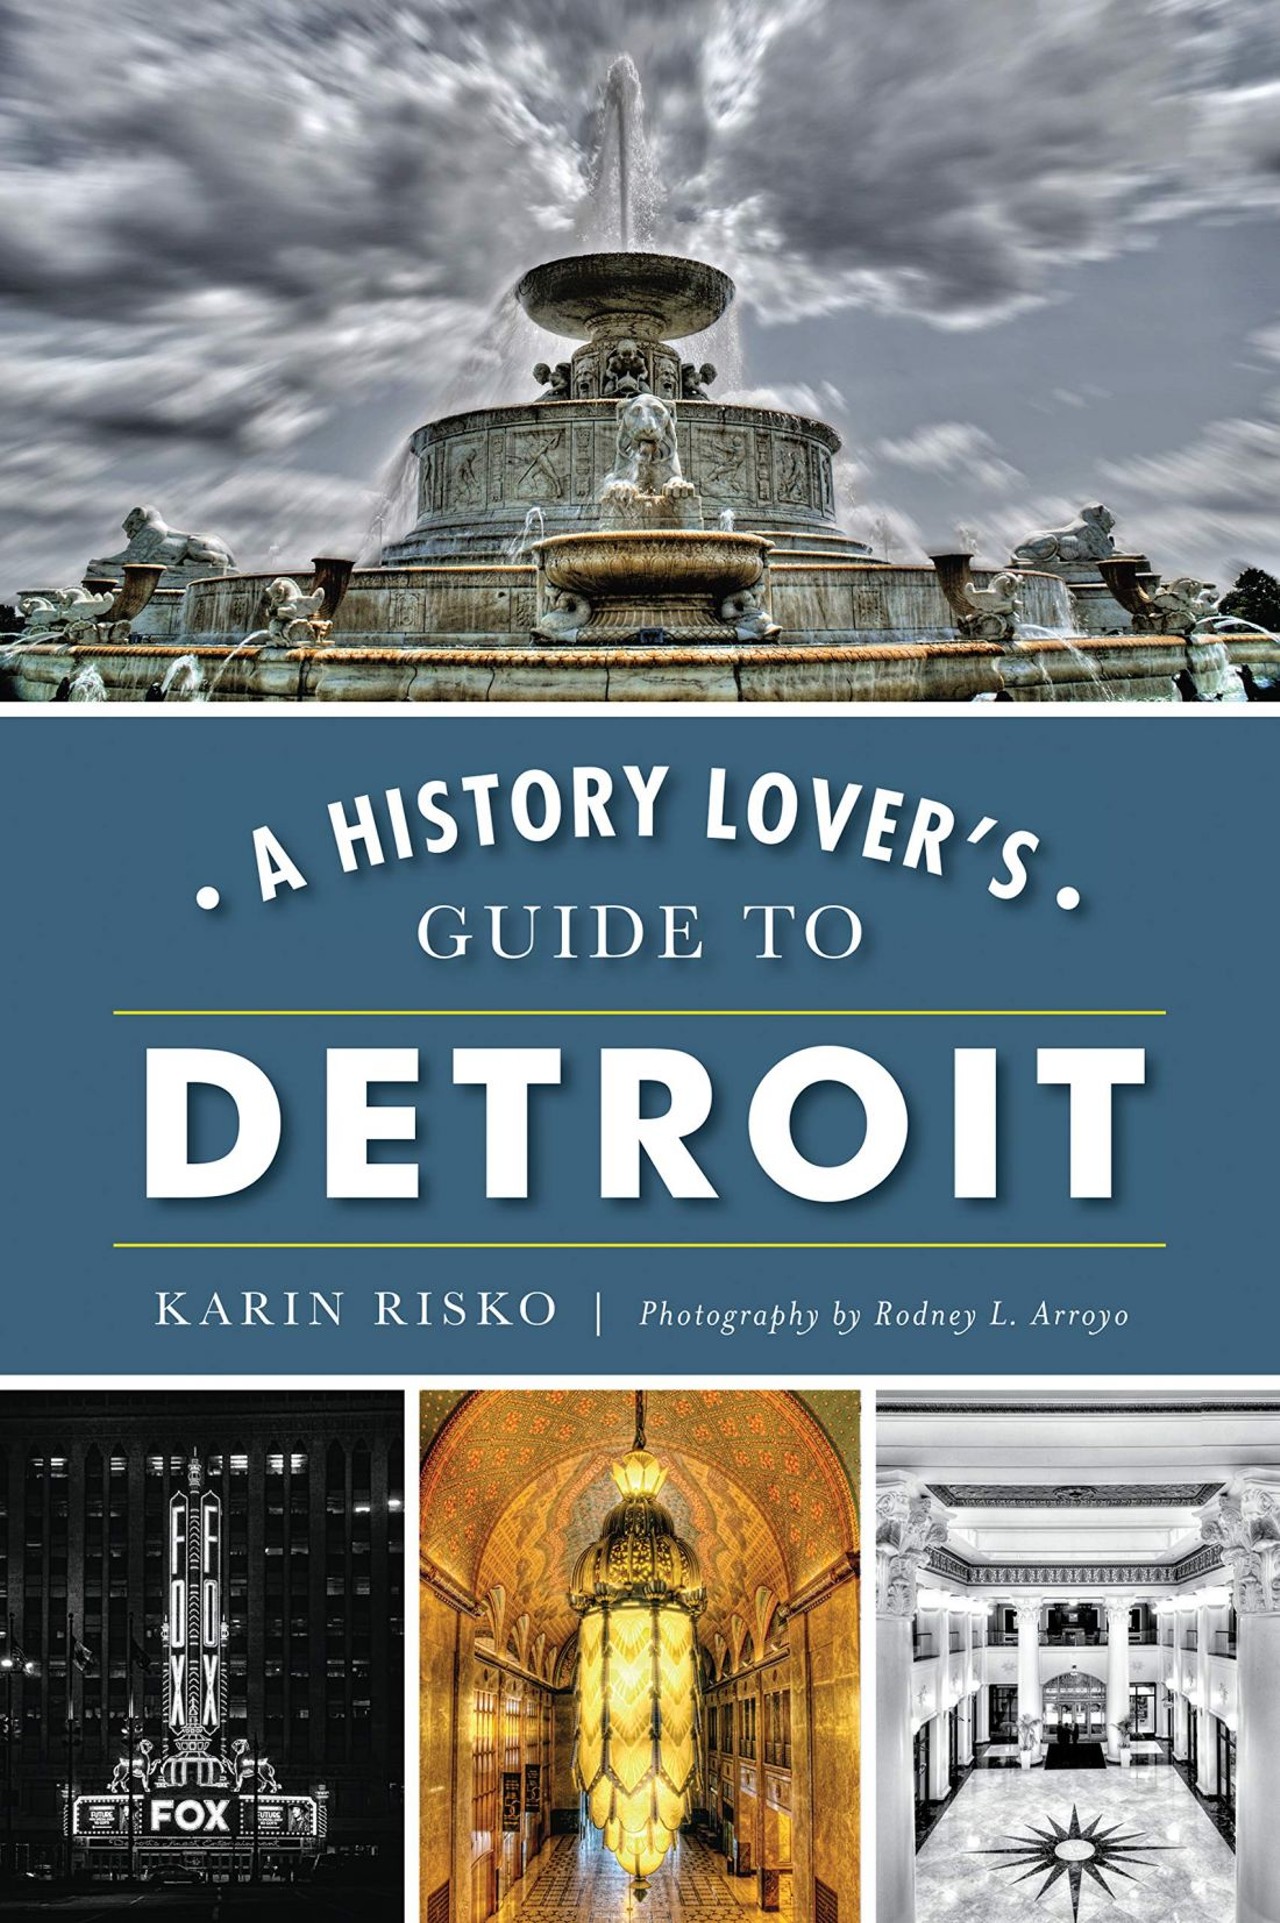 A History Lover&#146;s Guide to Detroit
Sure, Detroit is known to the world as the Motor City. However, often times people forget the other important parts of Detroit&#146;s identity. A History Lover&#146;s Guide to Detroit walks readers through many diverse moments in the city&#146;s history. From the tiny recording studio where Berry Gordy created a groundbreaking empire to a tour of Art Deco masterpieces to Dr. Martin Luther King Jr.&#146;s walk to Cobo Hall (where he first delivered his &#147;I Have a Dream&#148; speech) and more, author Karin Risko reminds readers both near and far of Detroit&#146;s storied history.